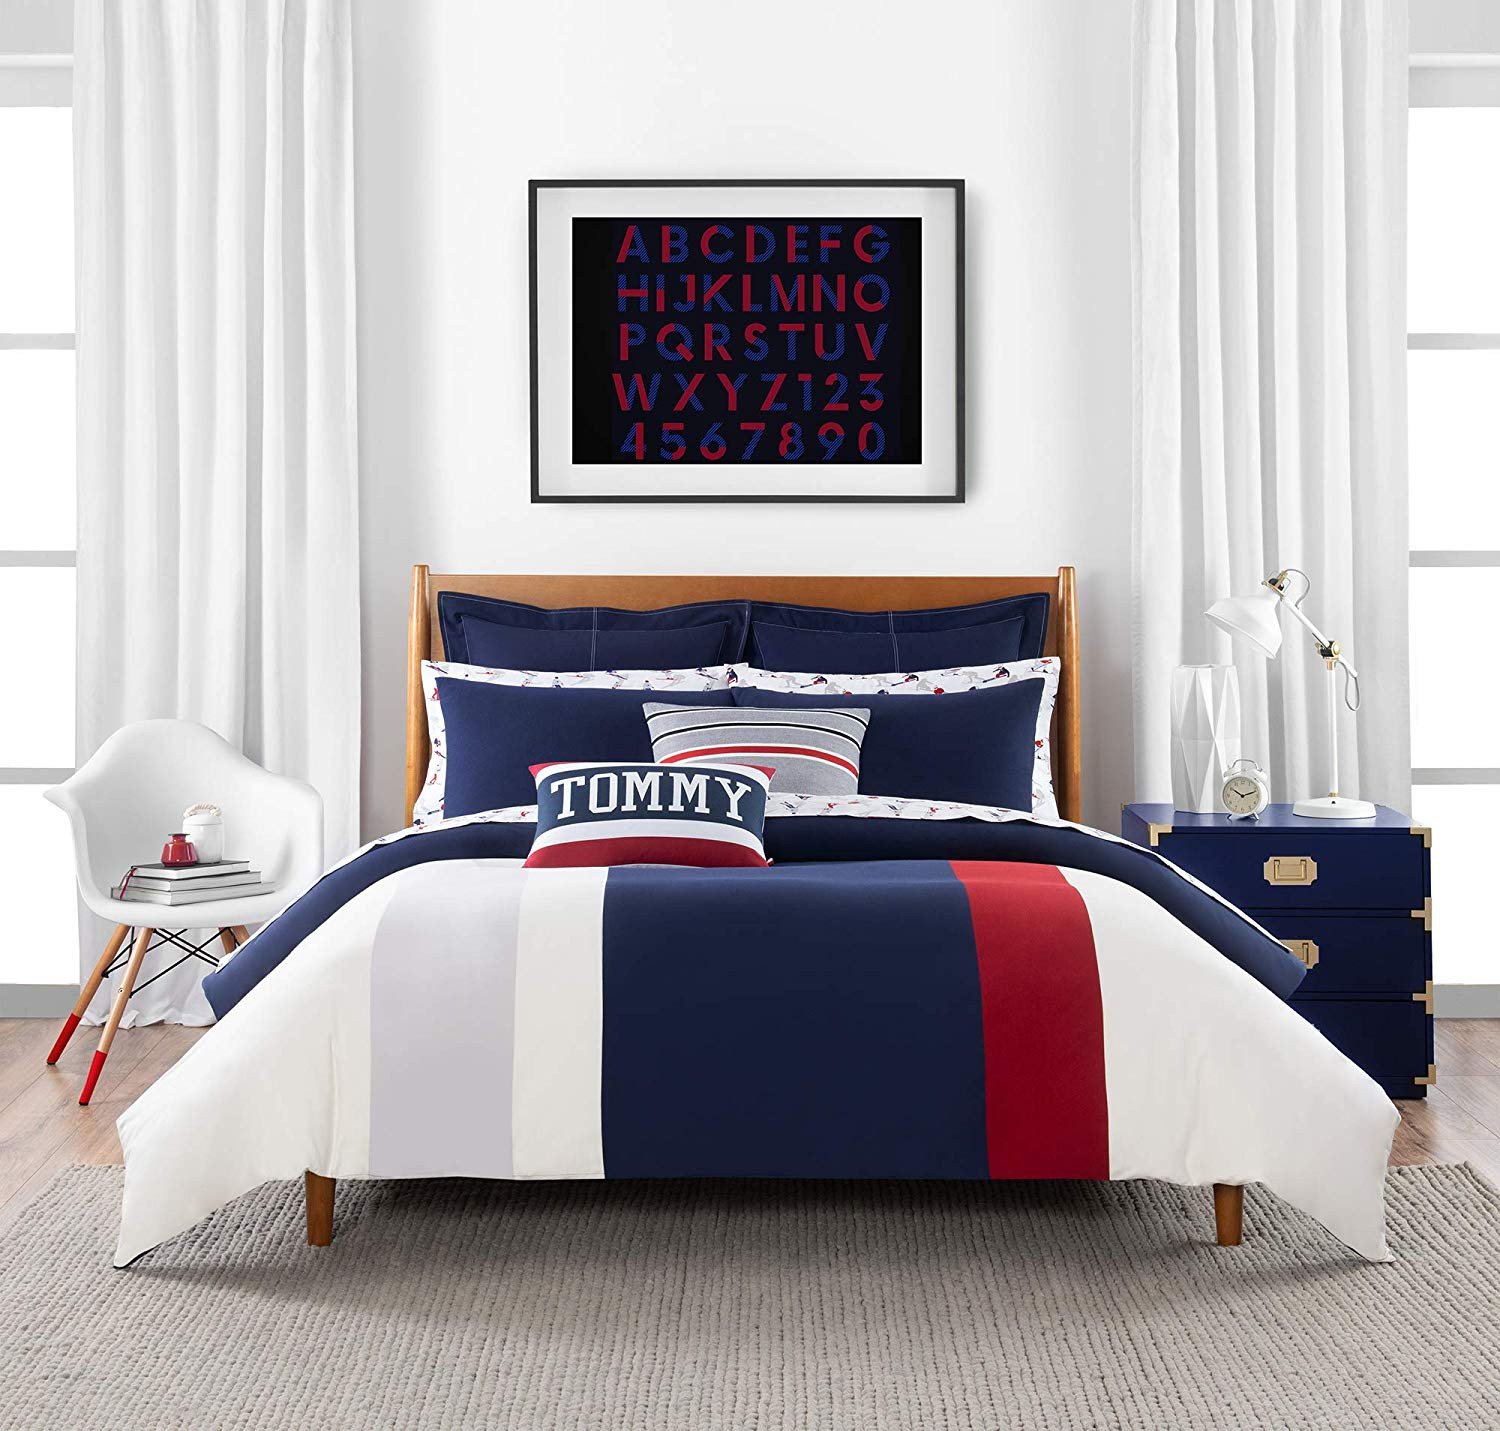 Girls Queen Bedroom Set Lovely Amazon tommy Hilfiger Clash Of 85 Stripe Bedding